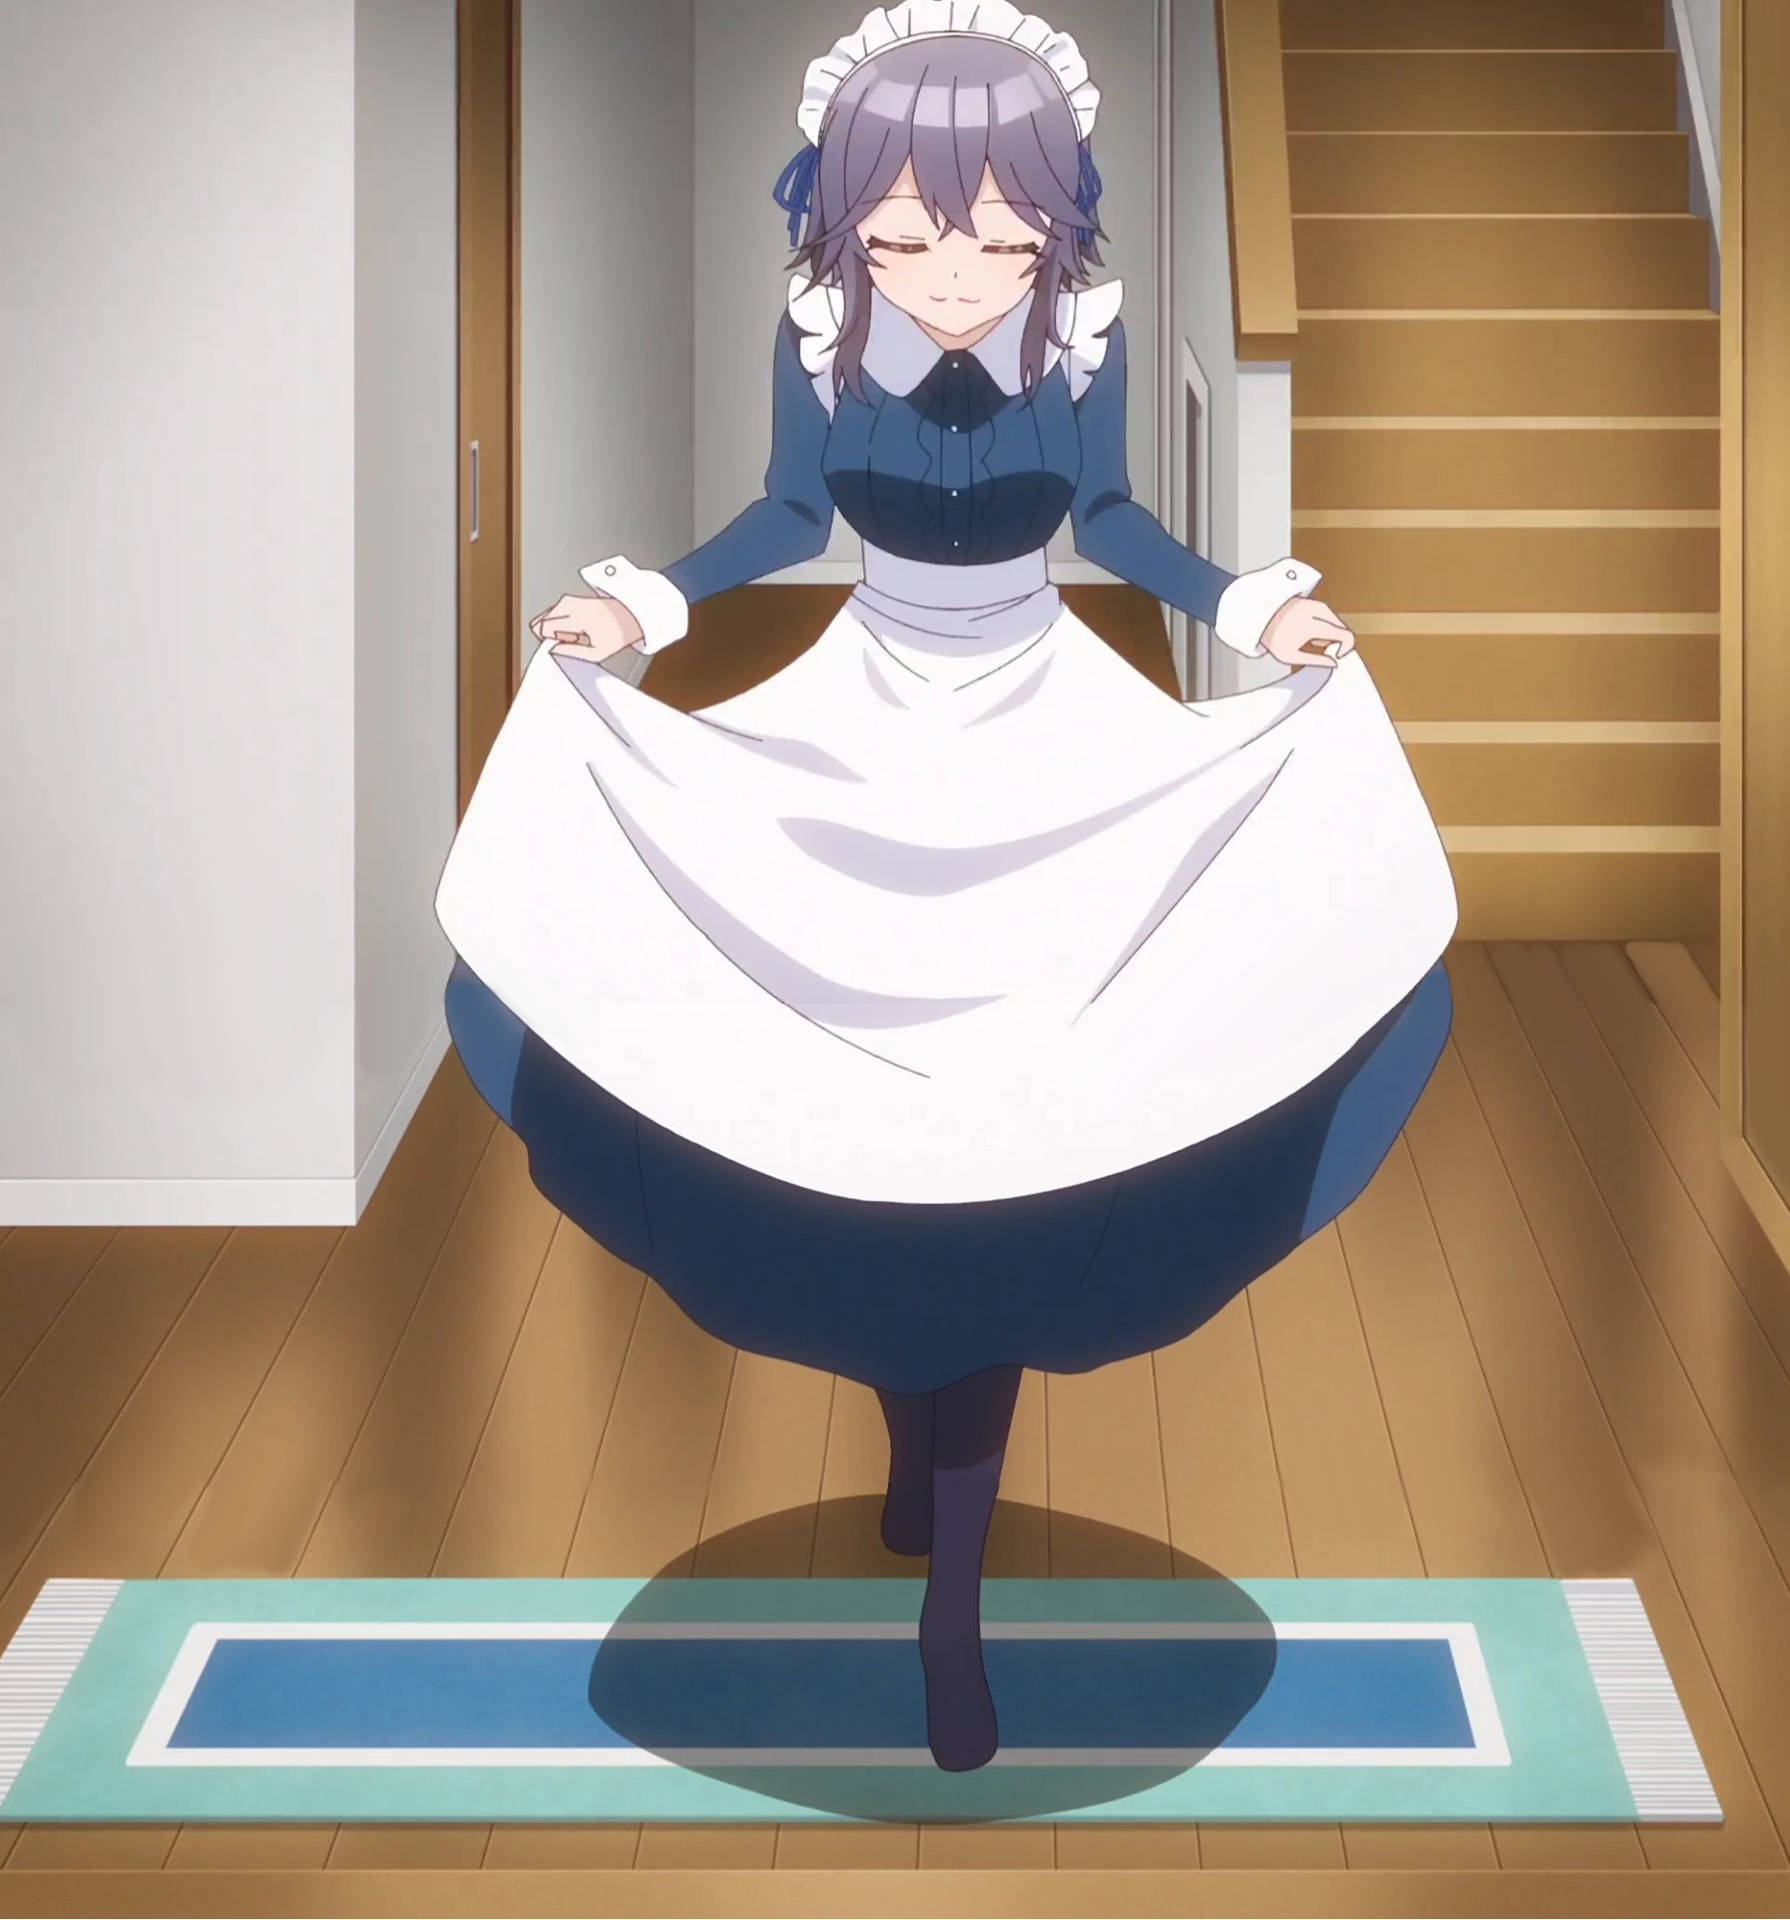 Osamake Shion In Maid Outfit Background